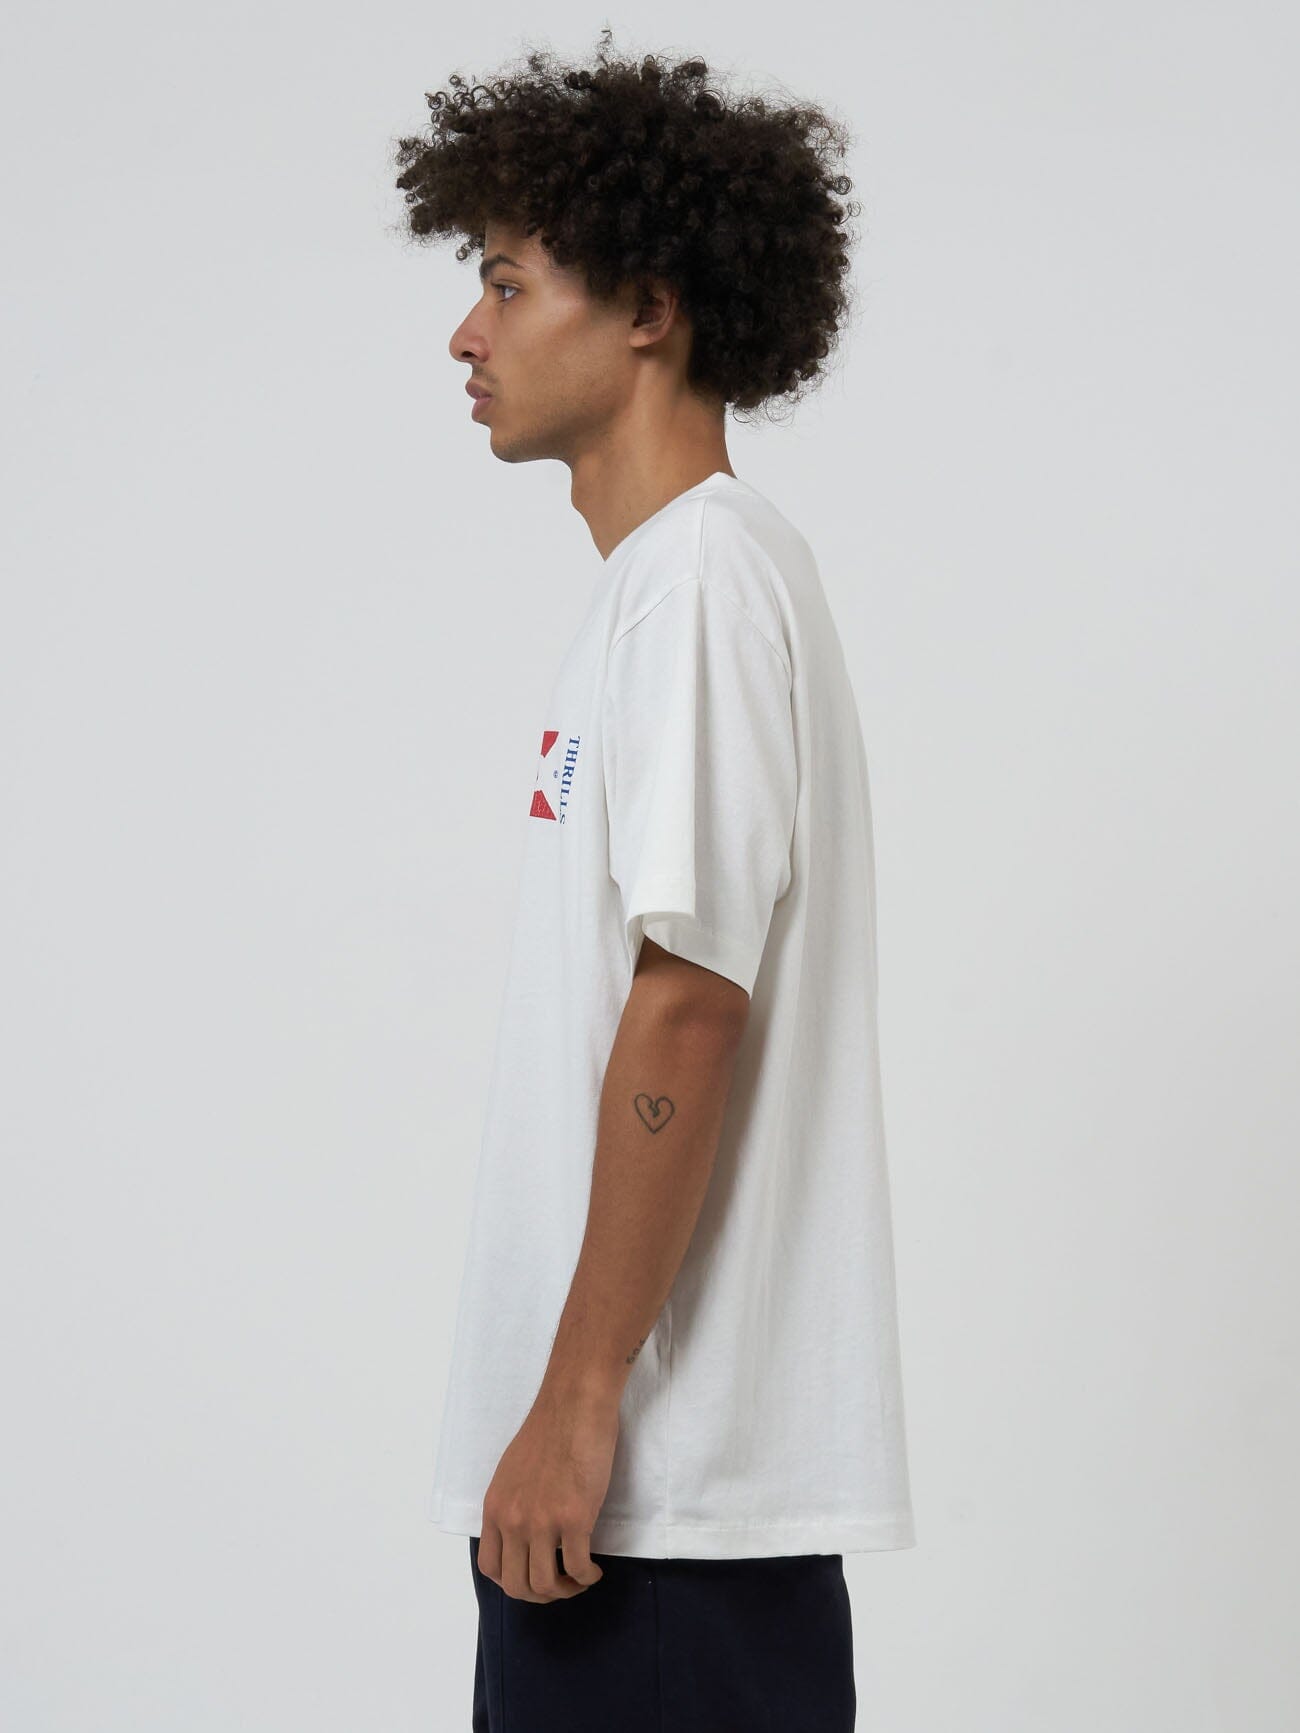 United For All Merch Fit Tee - Dirty White